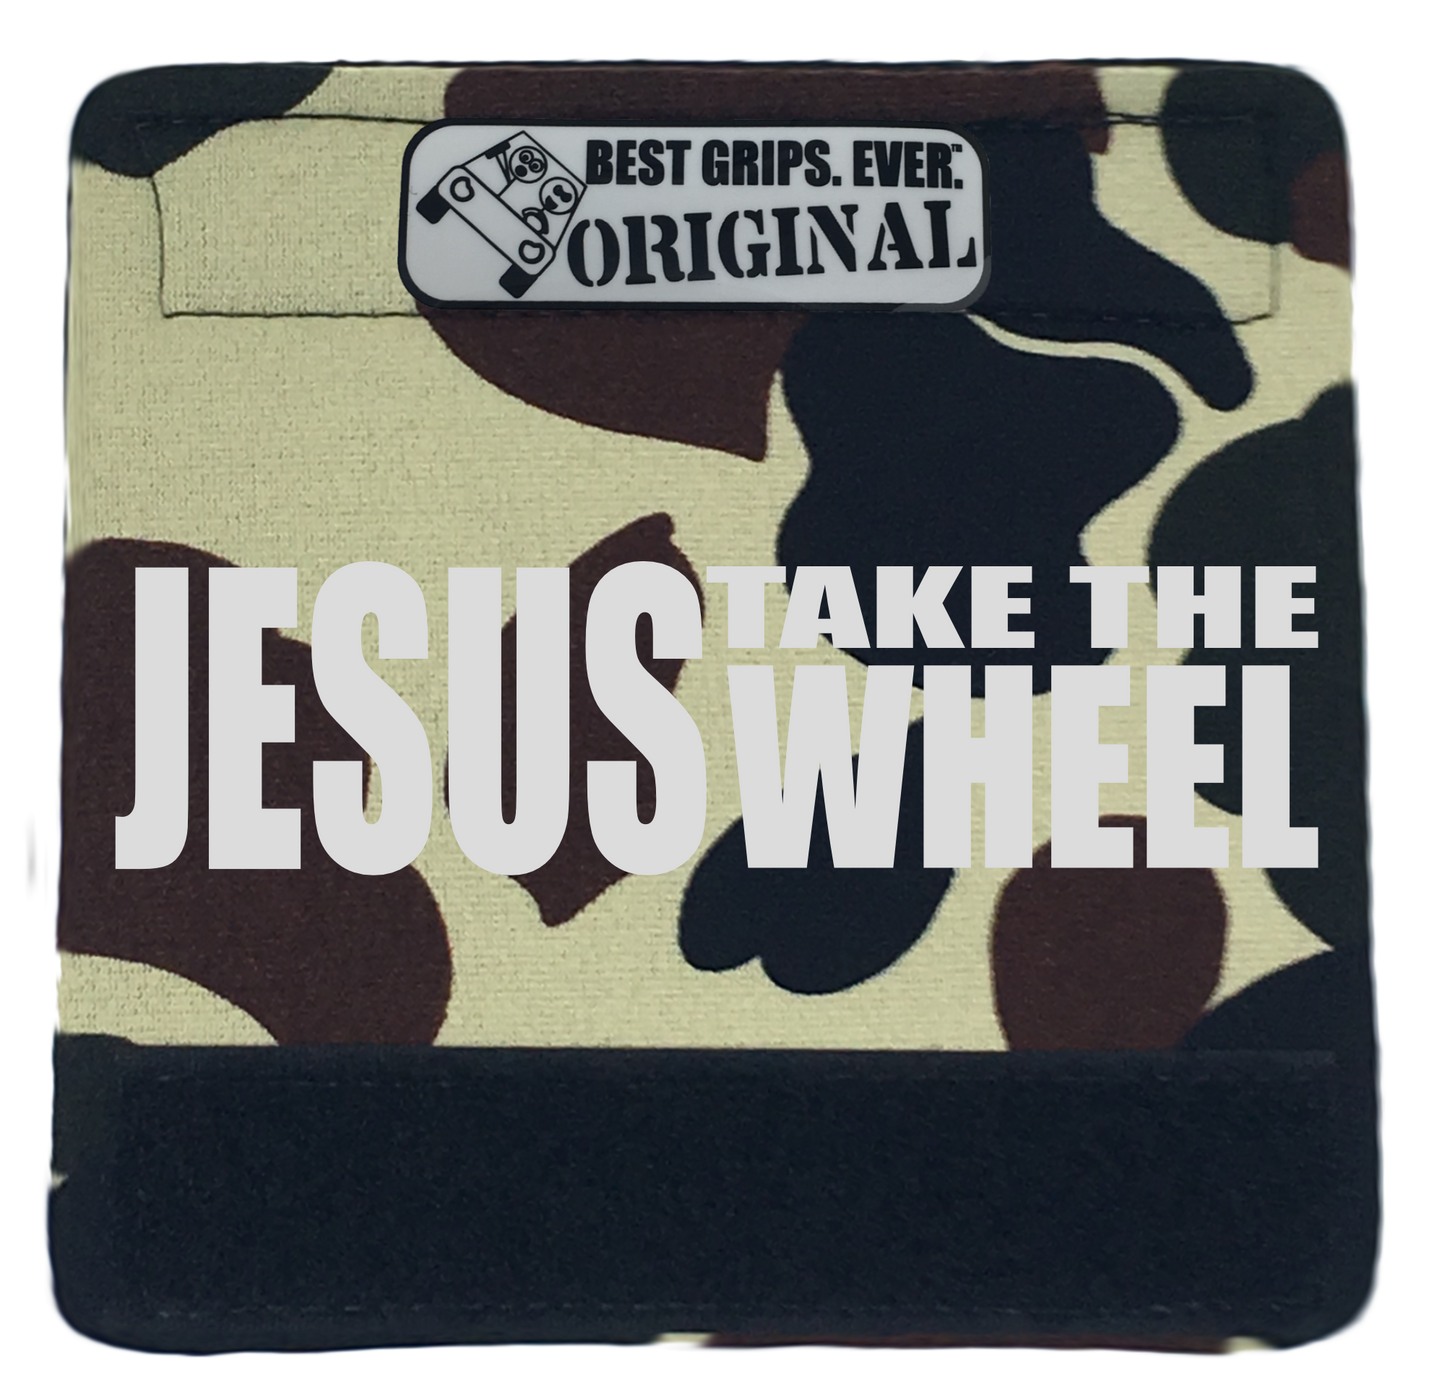 The Jesus Take the Wheel Grip. - BEST GRIPS. EVER.®